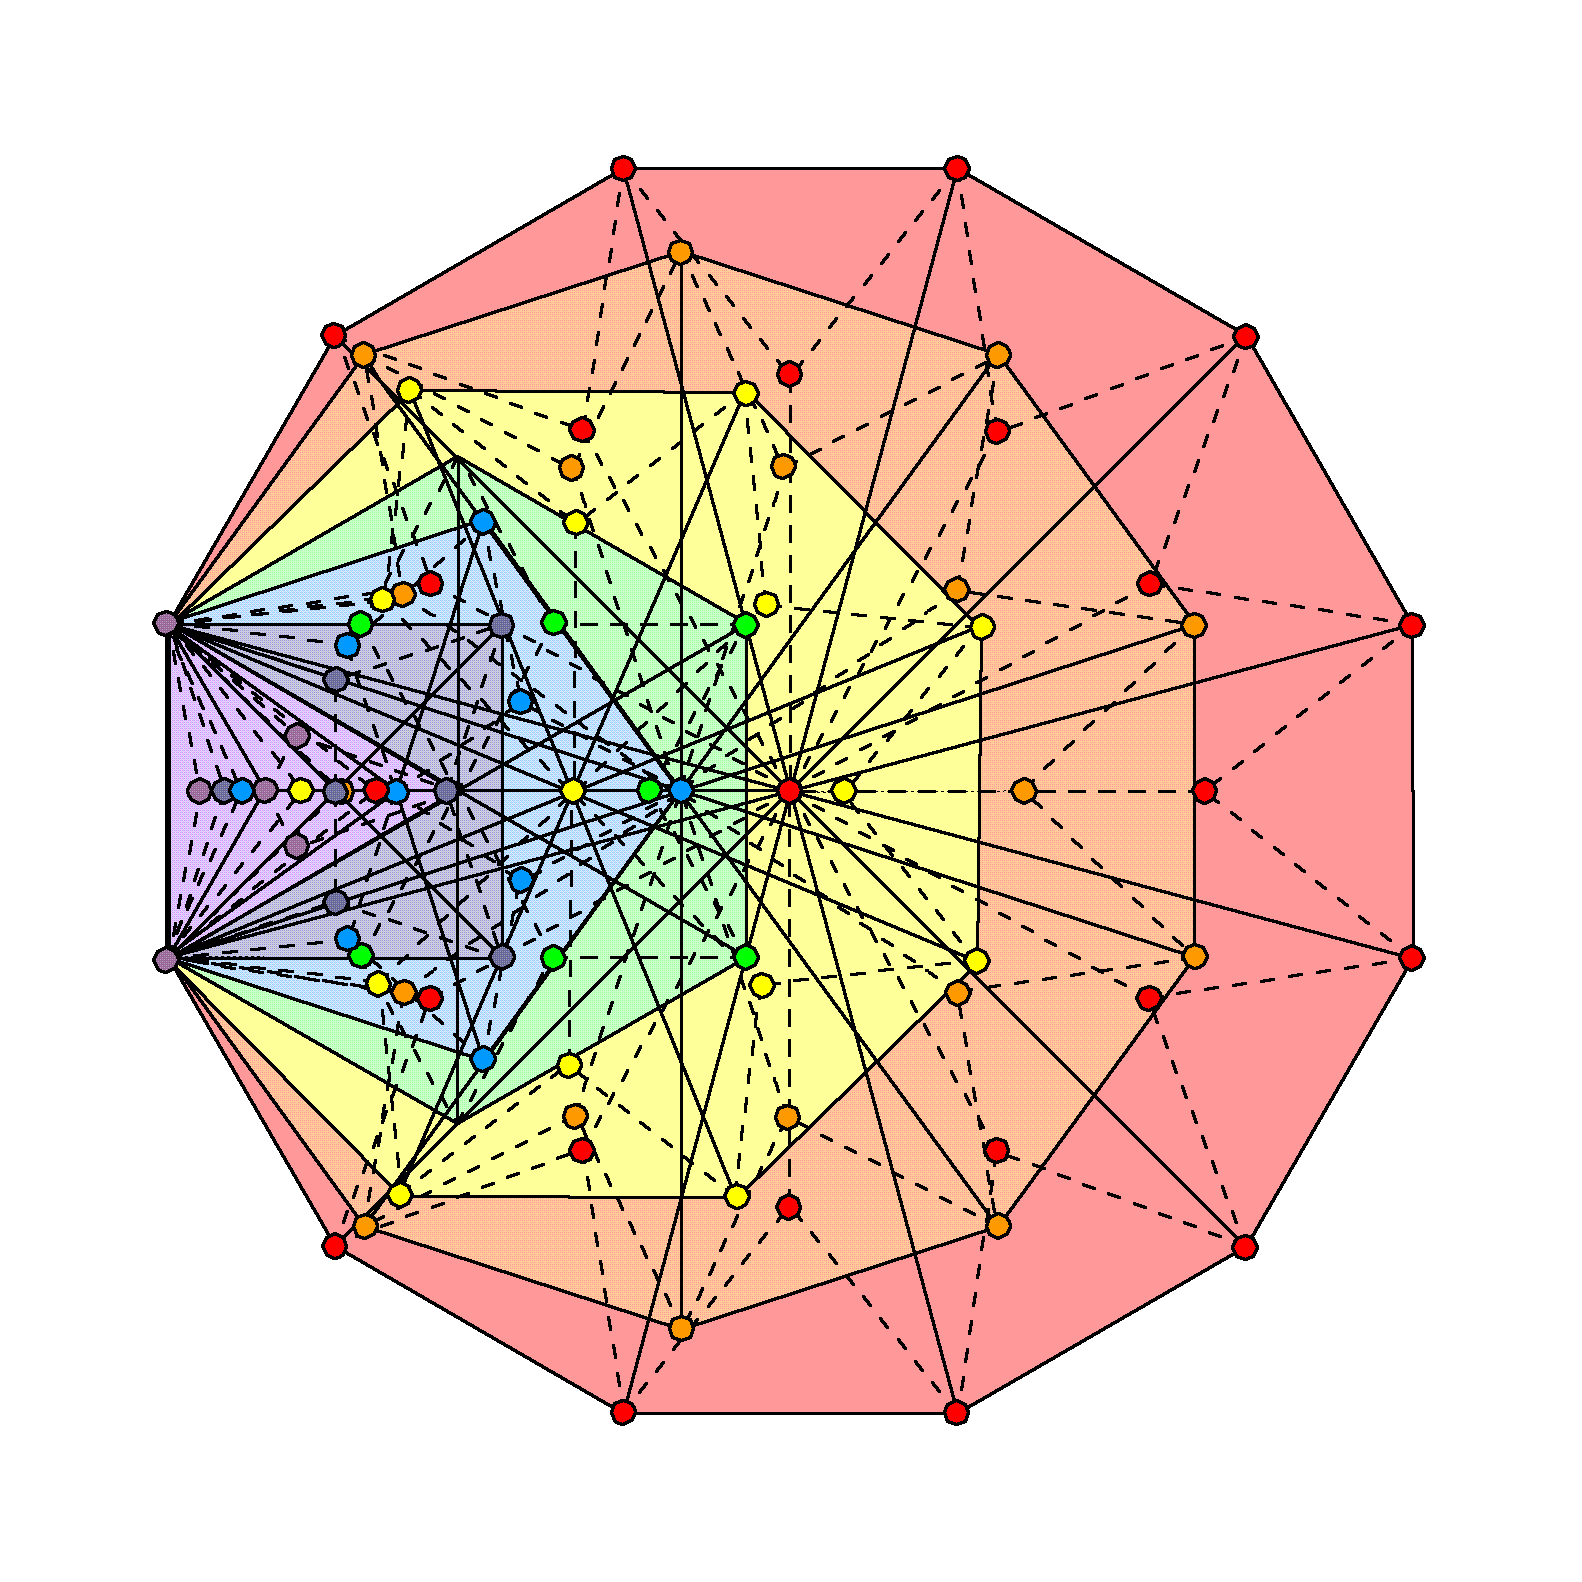 85 intrinsic corners of 47 sectors of 7 enfolded Type B polygons